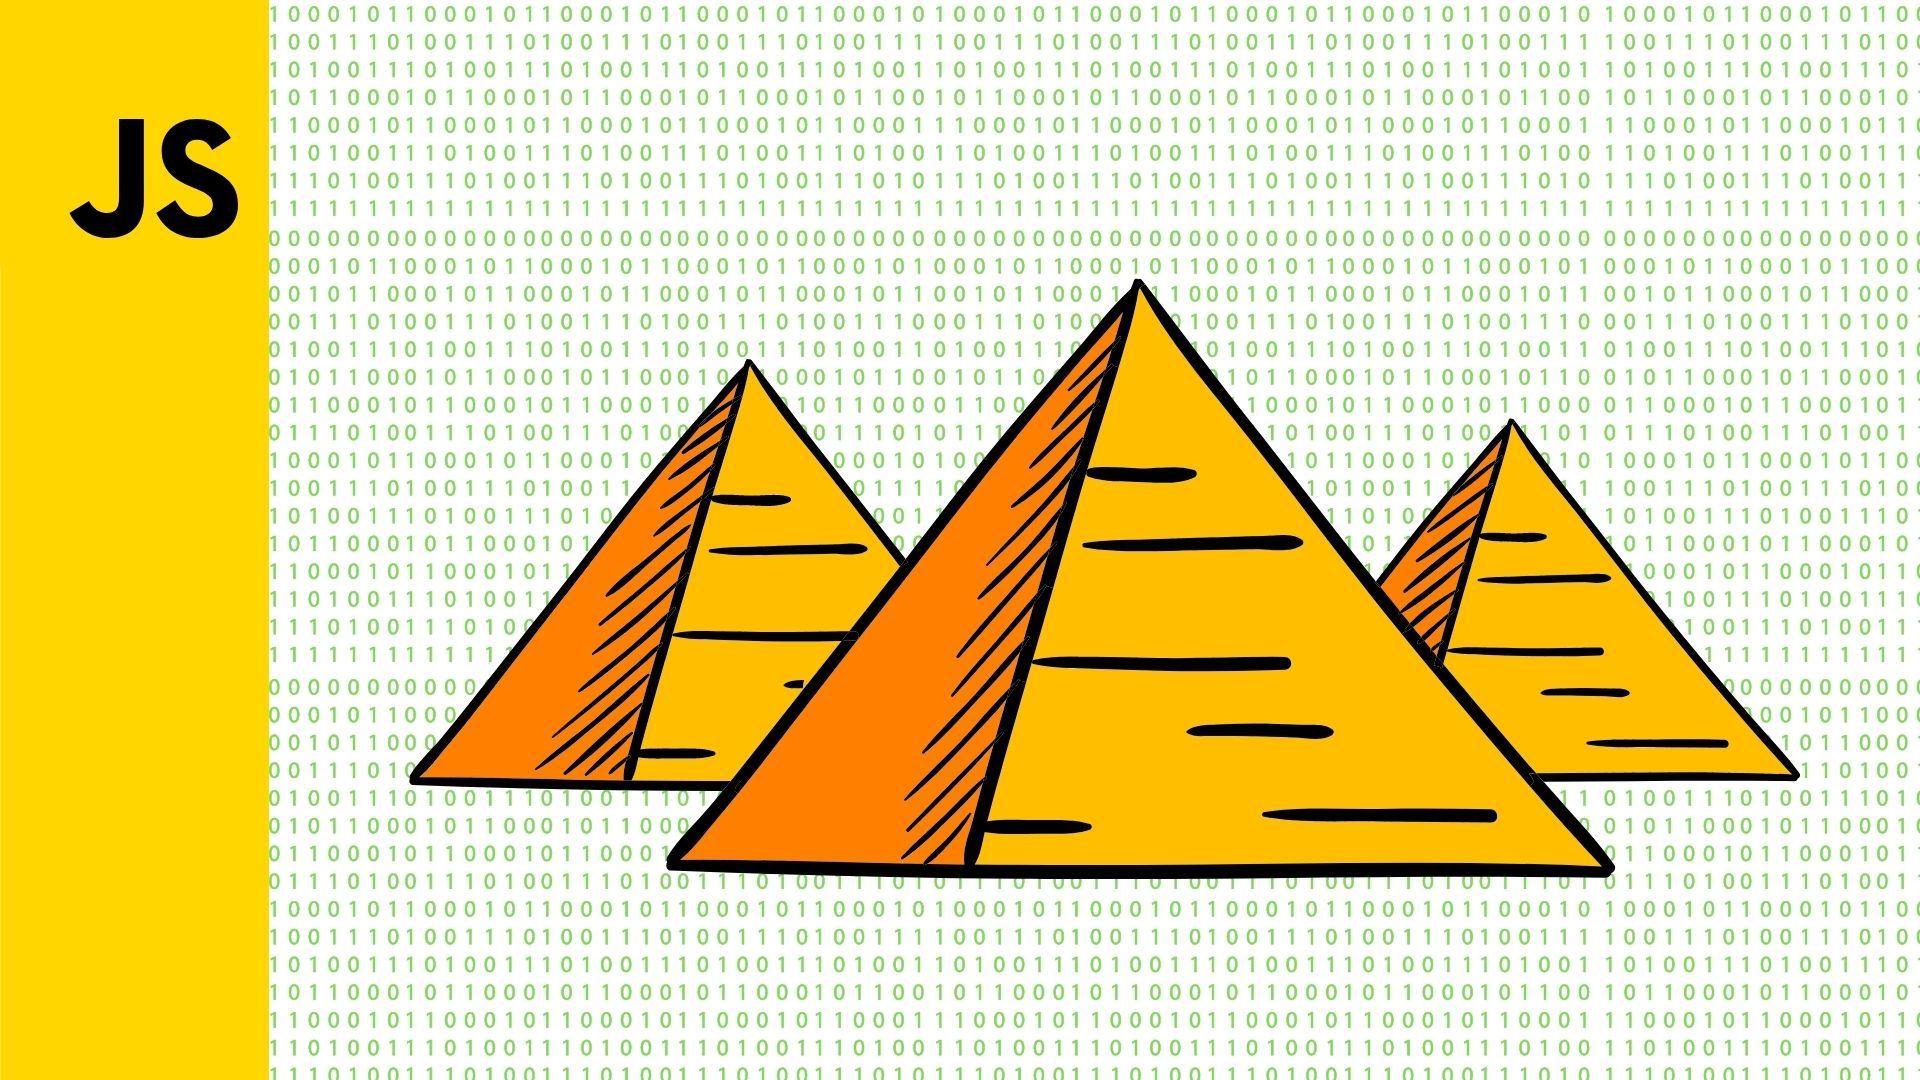 JavaScript Pyramid of Doom — How To Spot and Fix